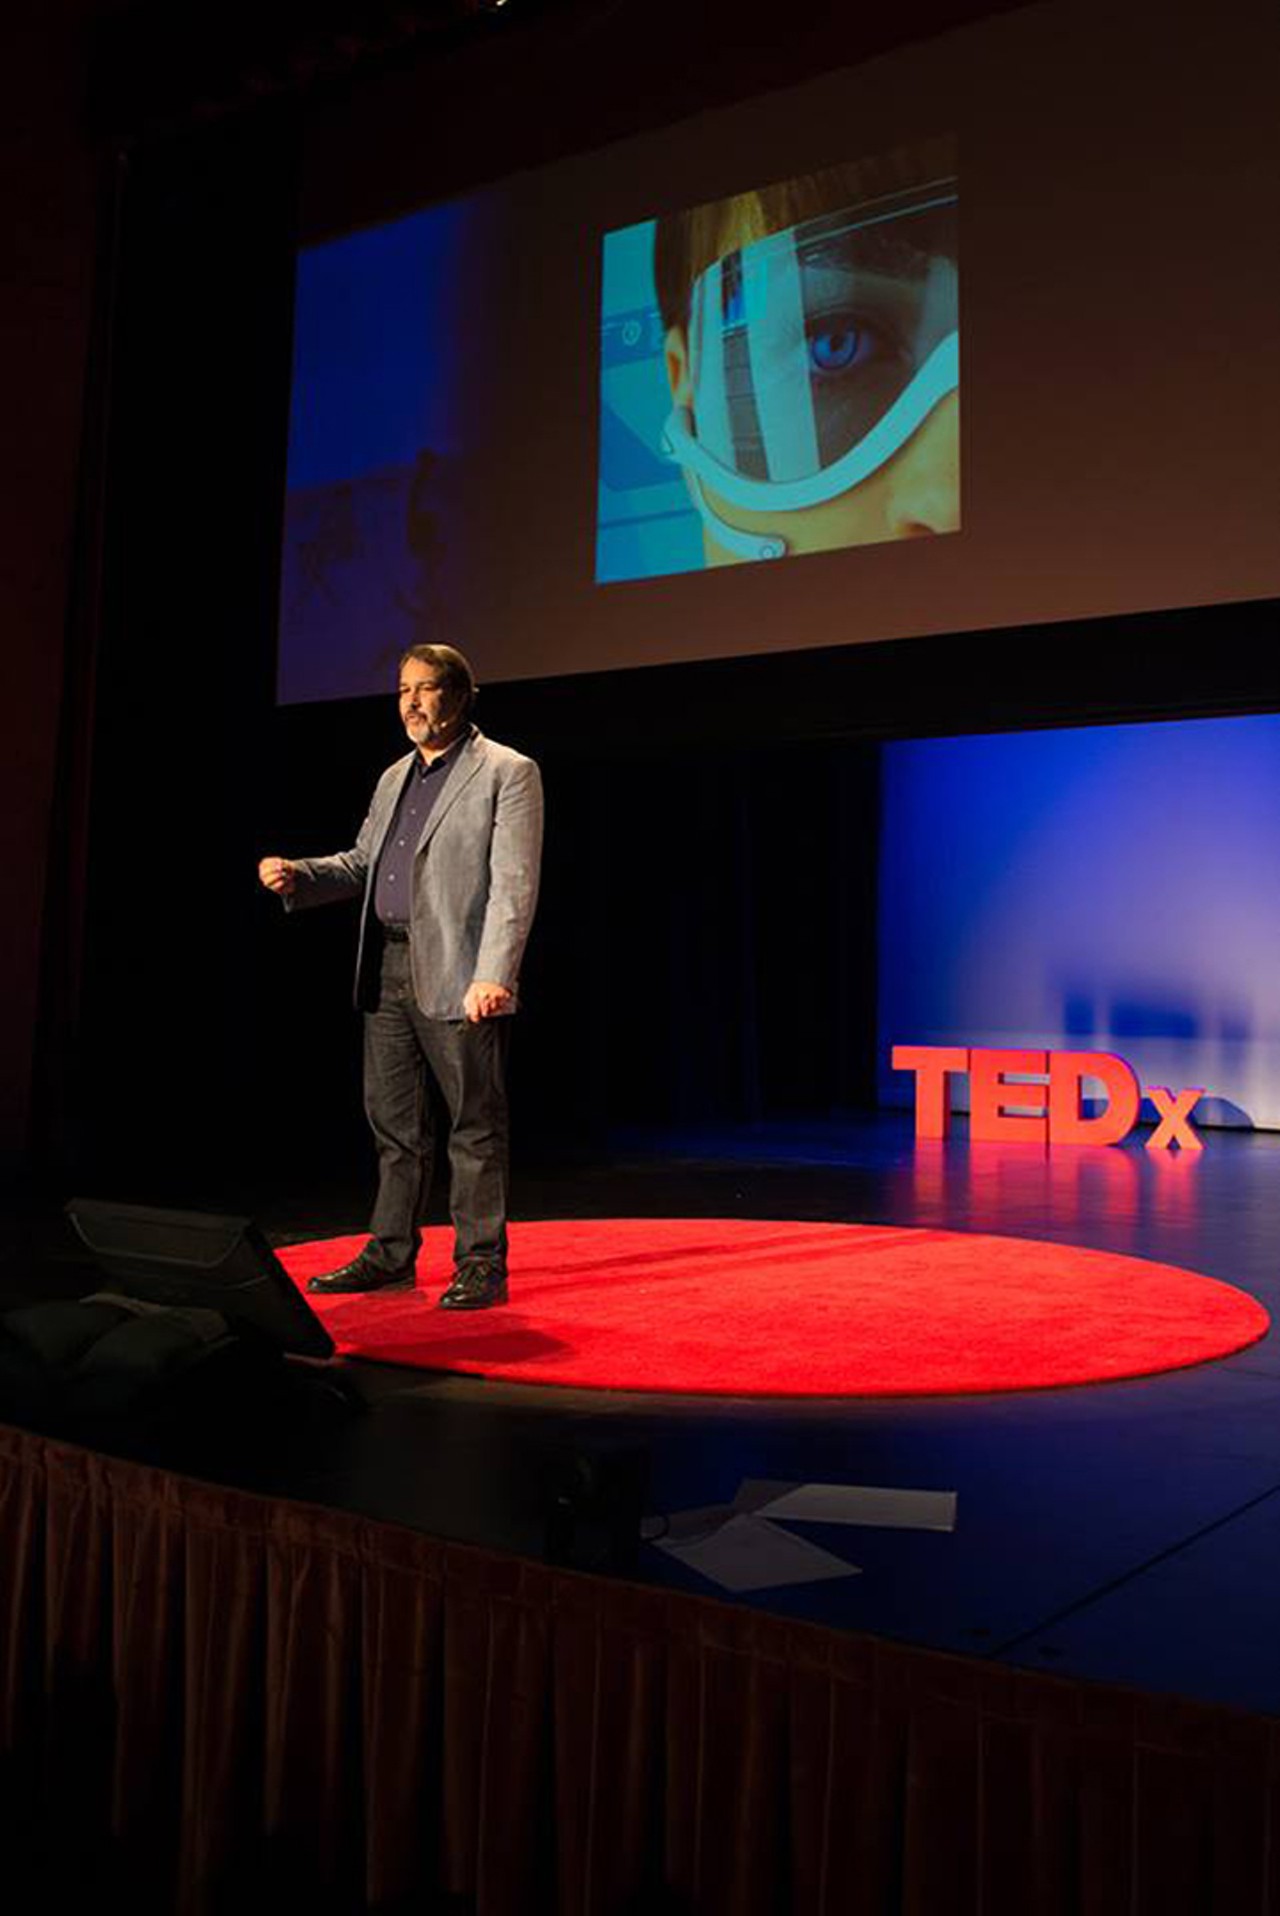 Saturday, June 24TEDxOrlando at the Dr. Phillips Center and livestreaming on Facebook